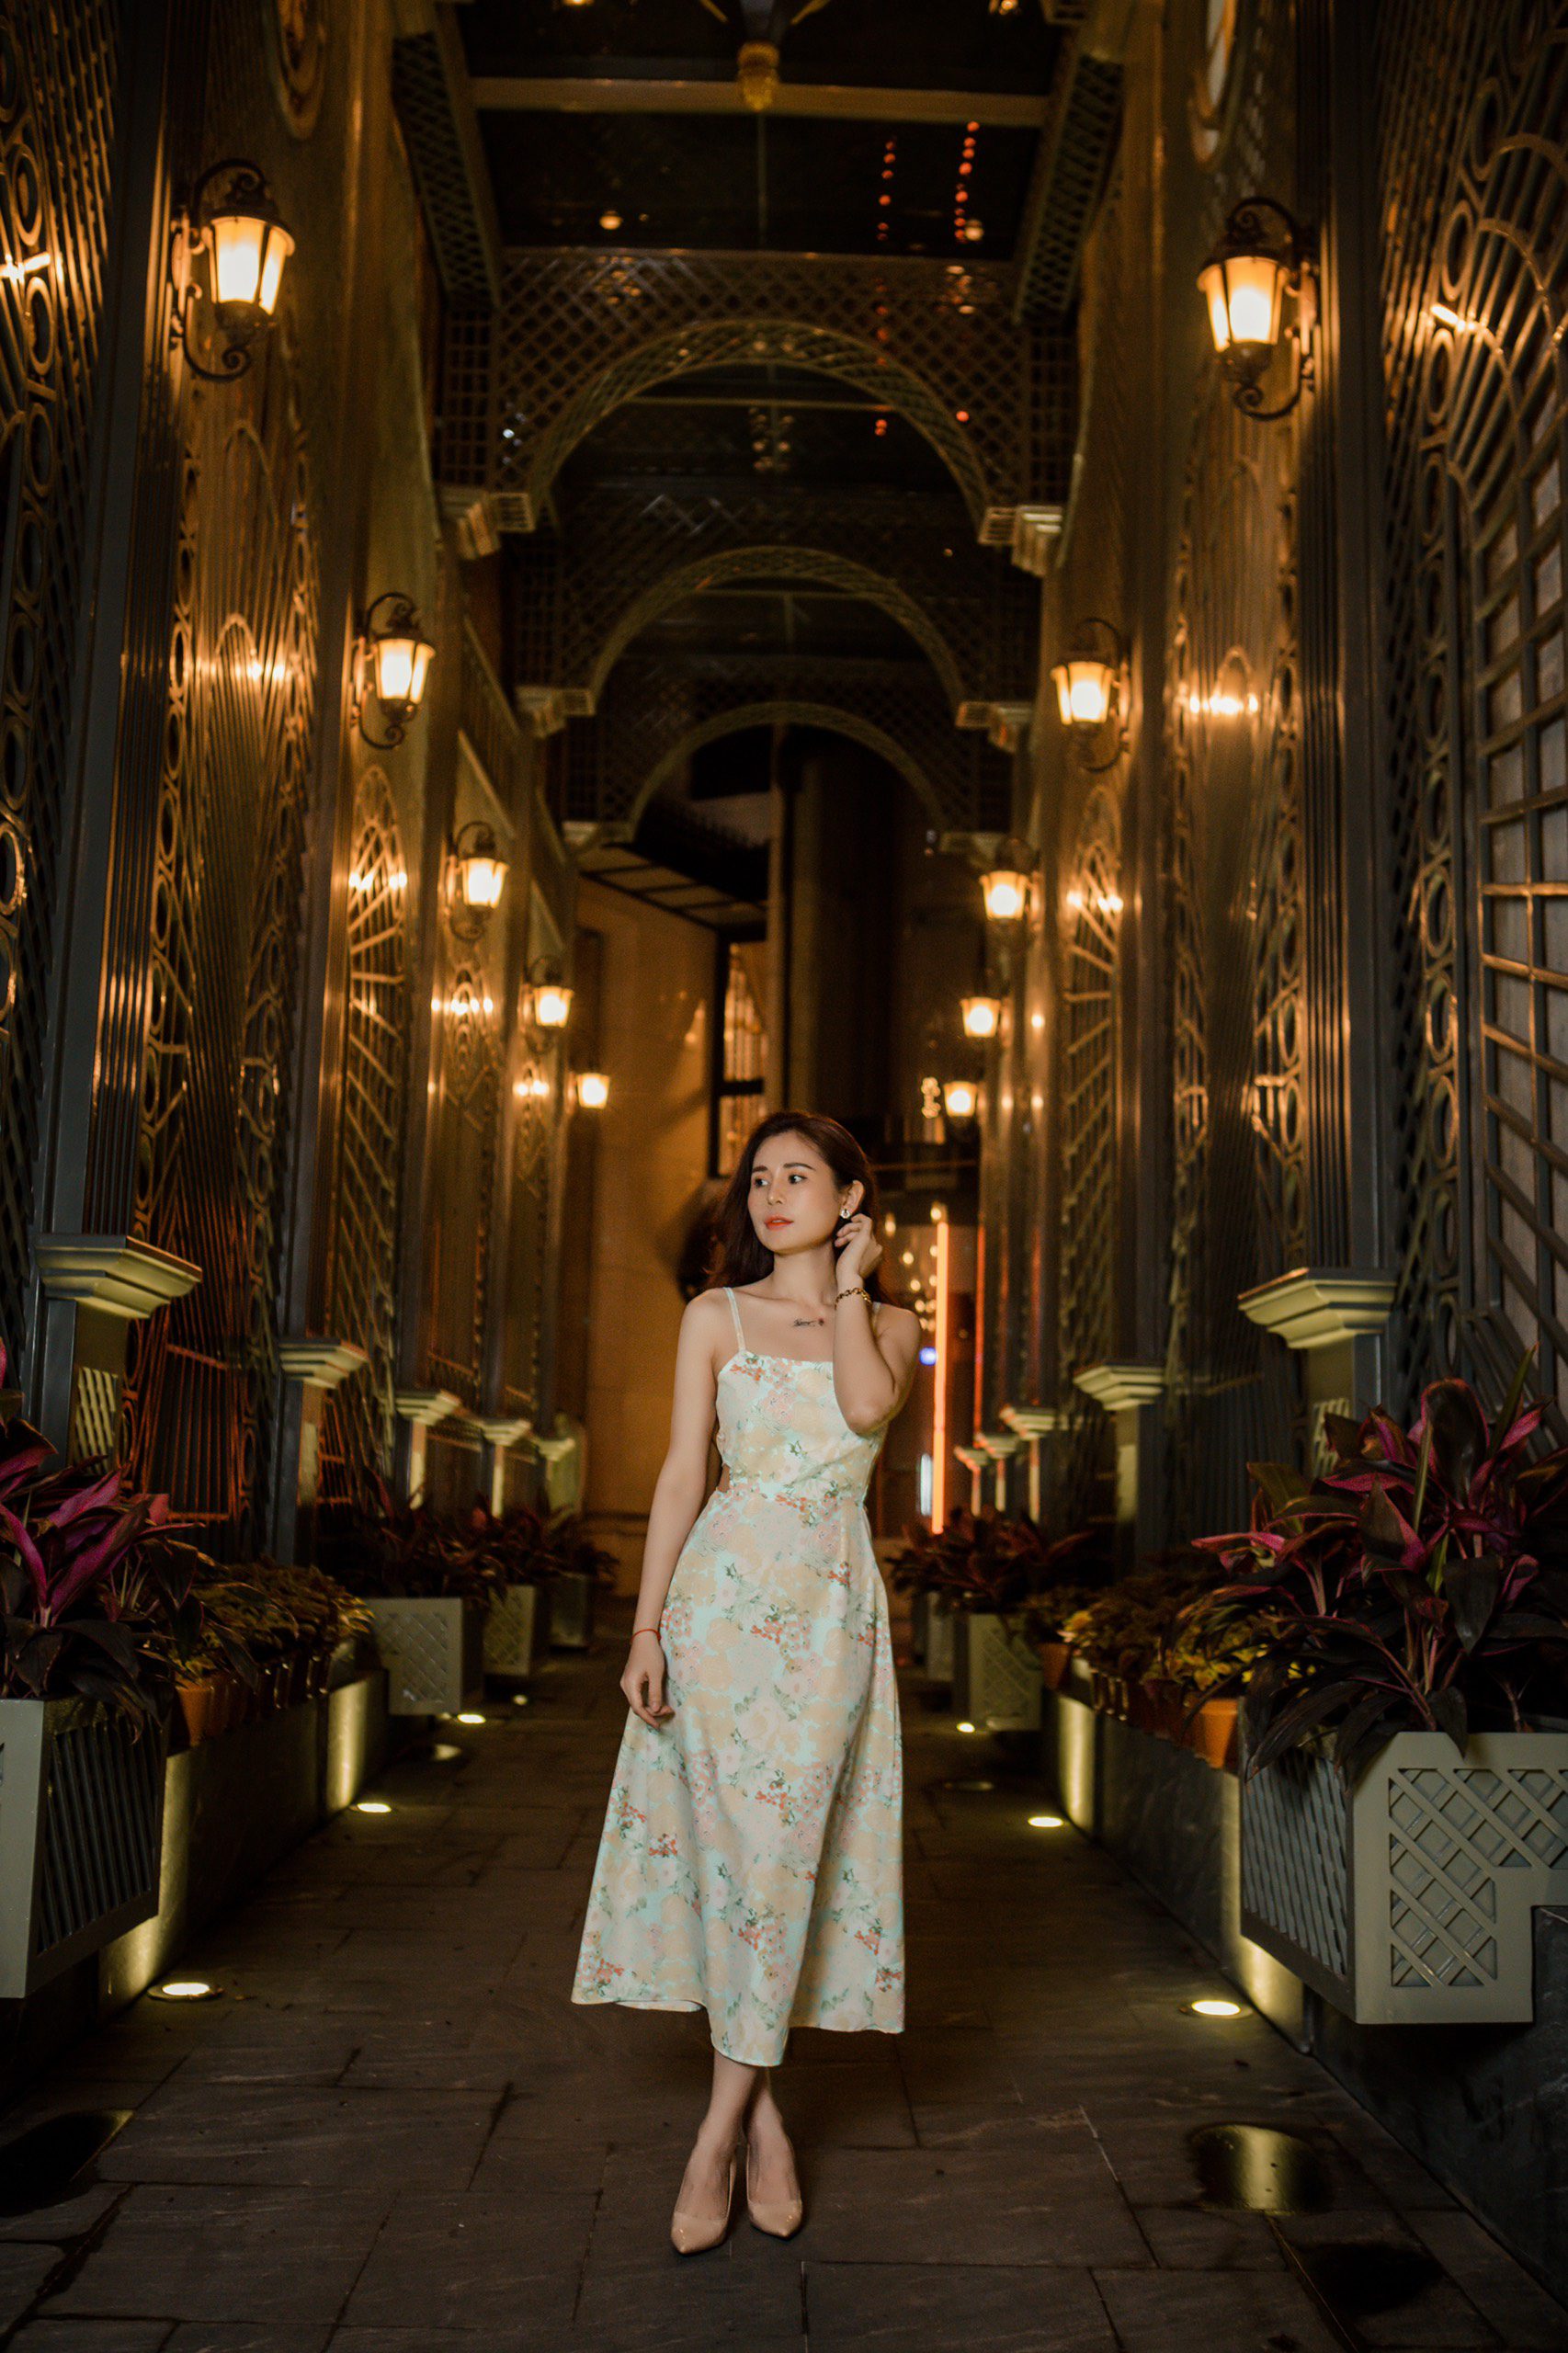 Anna Nguyen – One of Hanoi’s most iconic luxury 5-star hotels